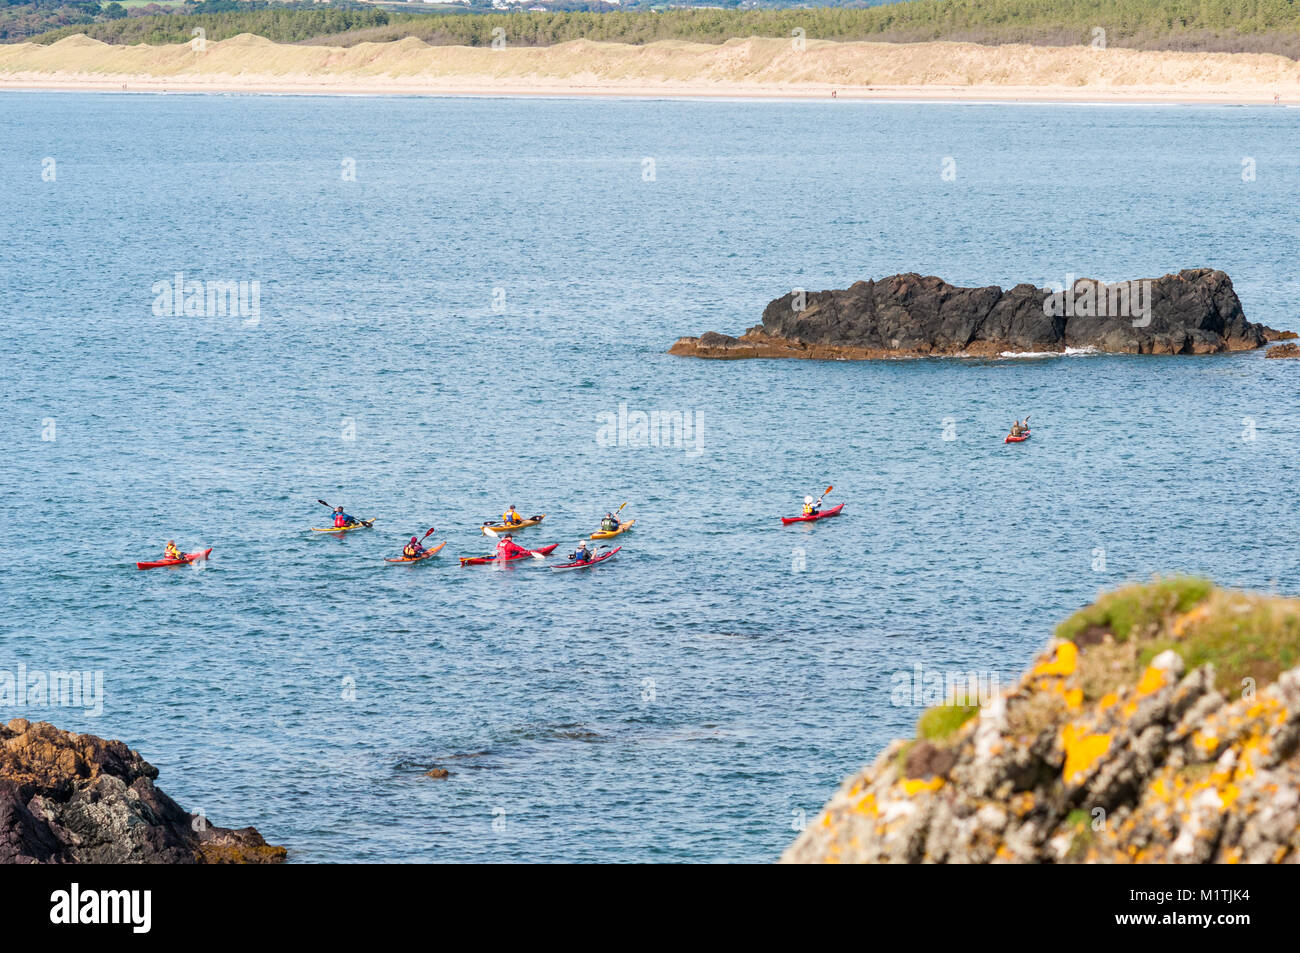 A group of people kayaking off the coast of Llanddwyn island in the Irish sea on a late Summer day, Anglesey, Wales Stock Photo